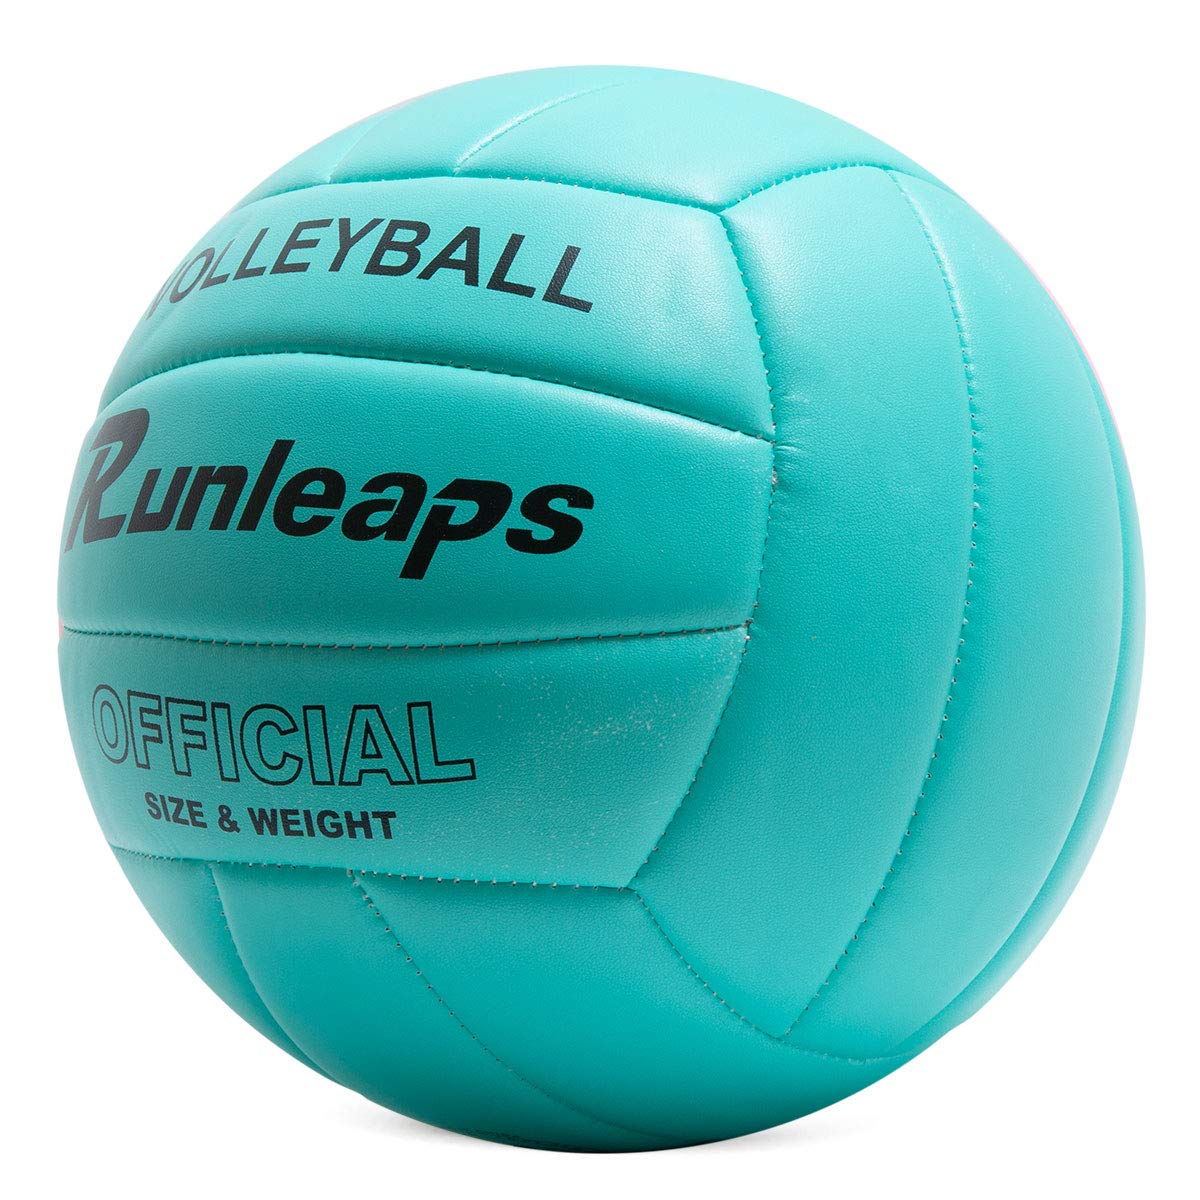 Runleaps Volleyball, Waterproof Indoor Outdoor Volleyball for Beach Game Gym Training (Official Size 5, Blue)